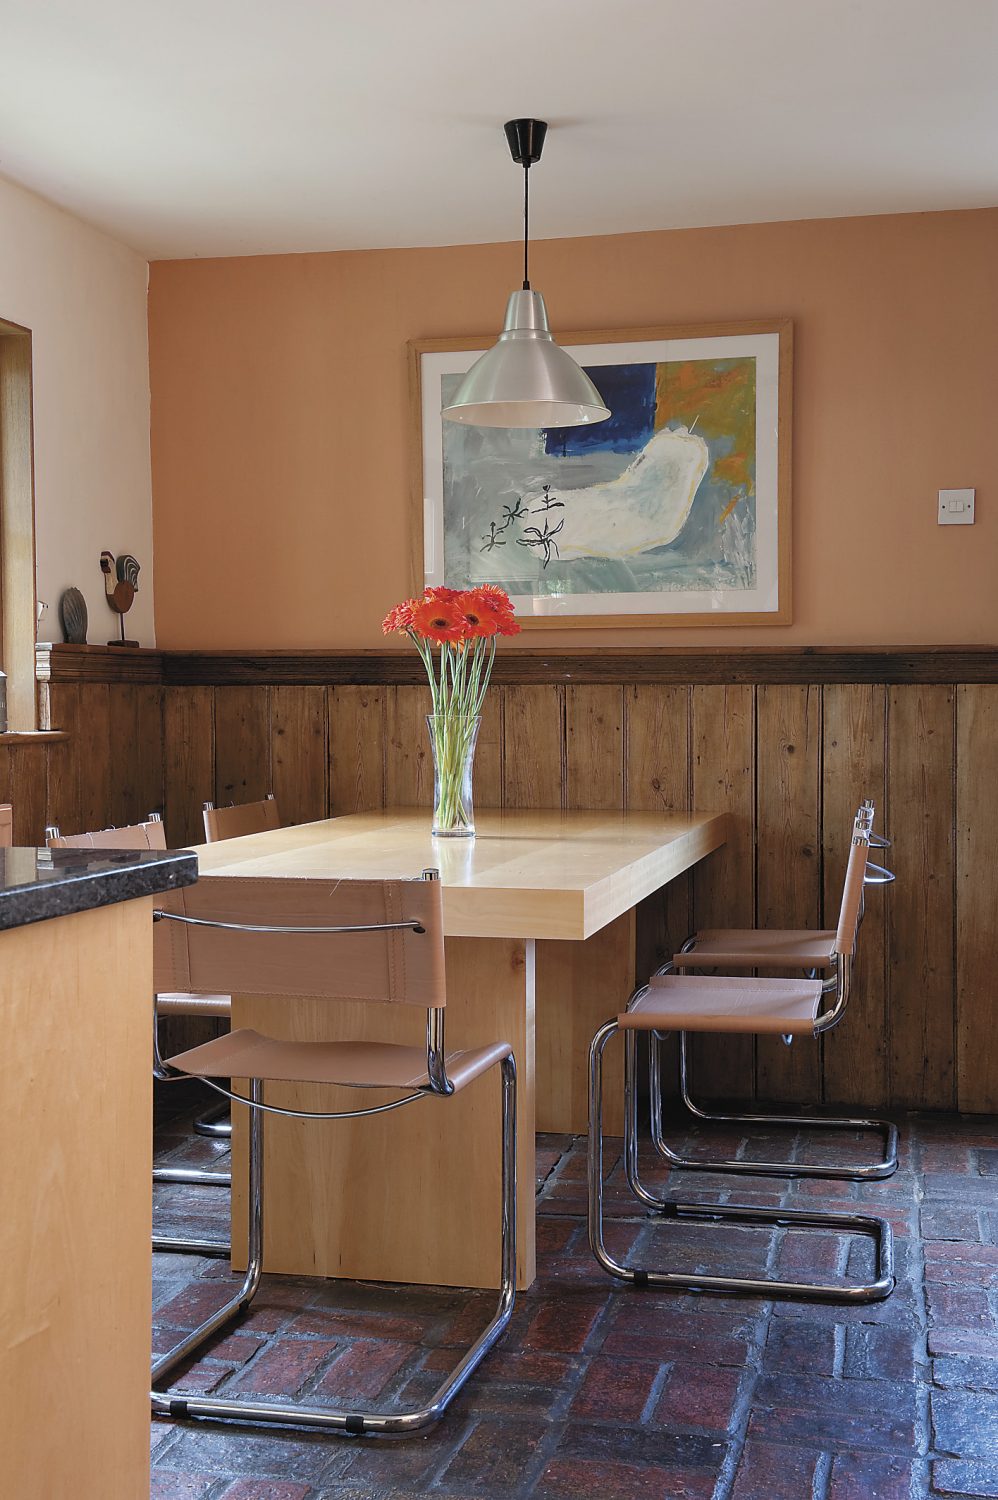 art is a key feature in the home – this piece above the dining table was painted by a college colleague of Barry’s